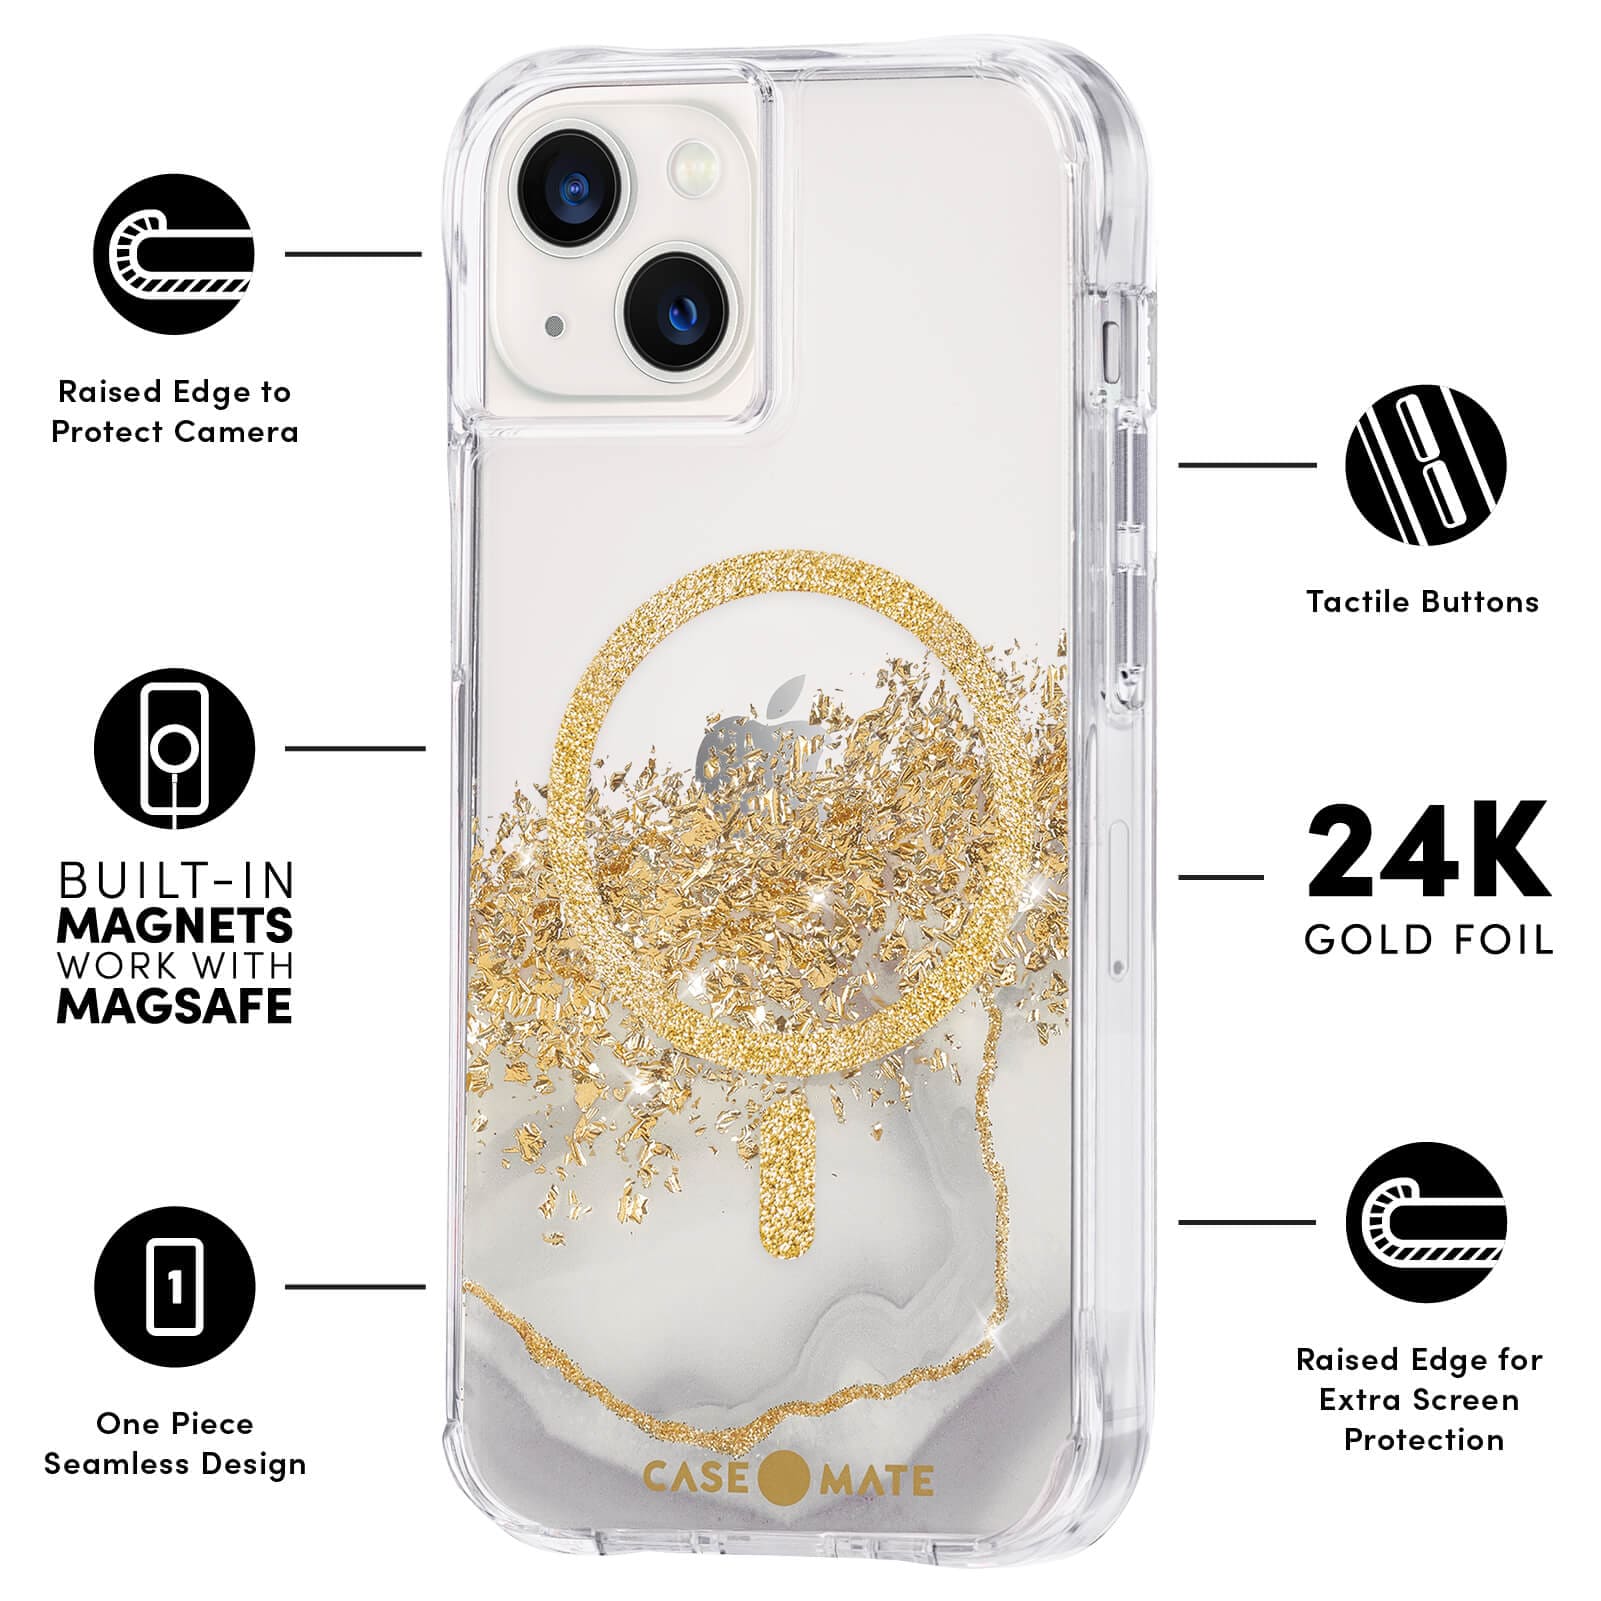 FEATURES: RAISED EDGE TO PROTECT CAMERA, BUILT IN MAGNETS WORK WITH MAGSAFE, ONE PIECE SEAMLESS DESIGN, TACTILE BUTTONS, 24K GOLD FOIL,RAISED EDGE FOR EXTRA SCREEN PROTECTION. COLOR::KARAT MARBLE